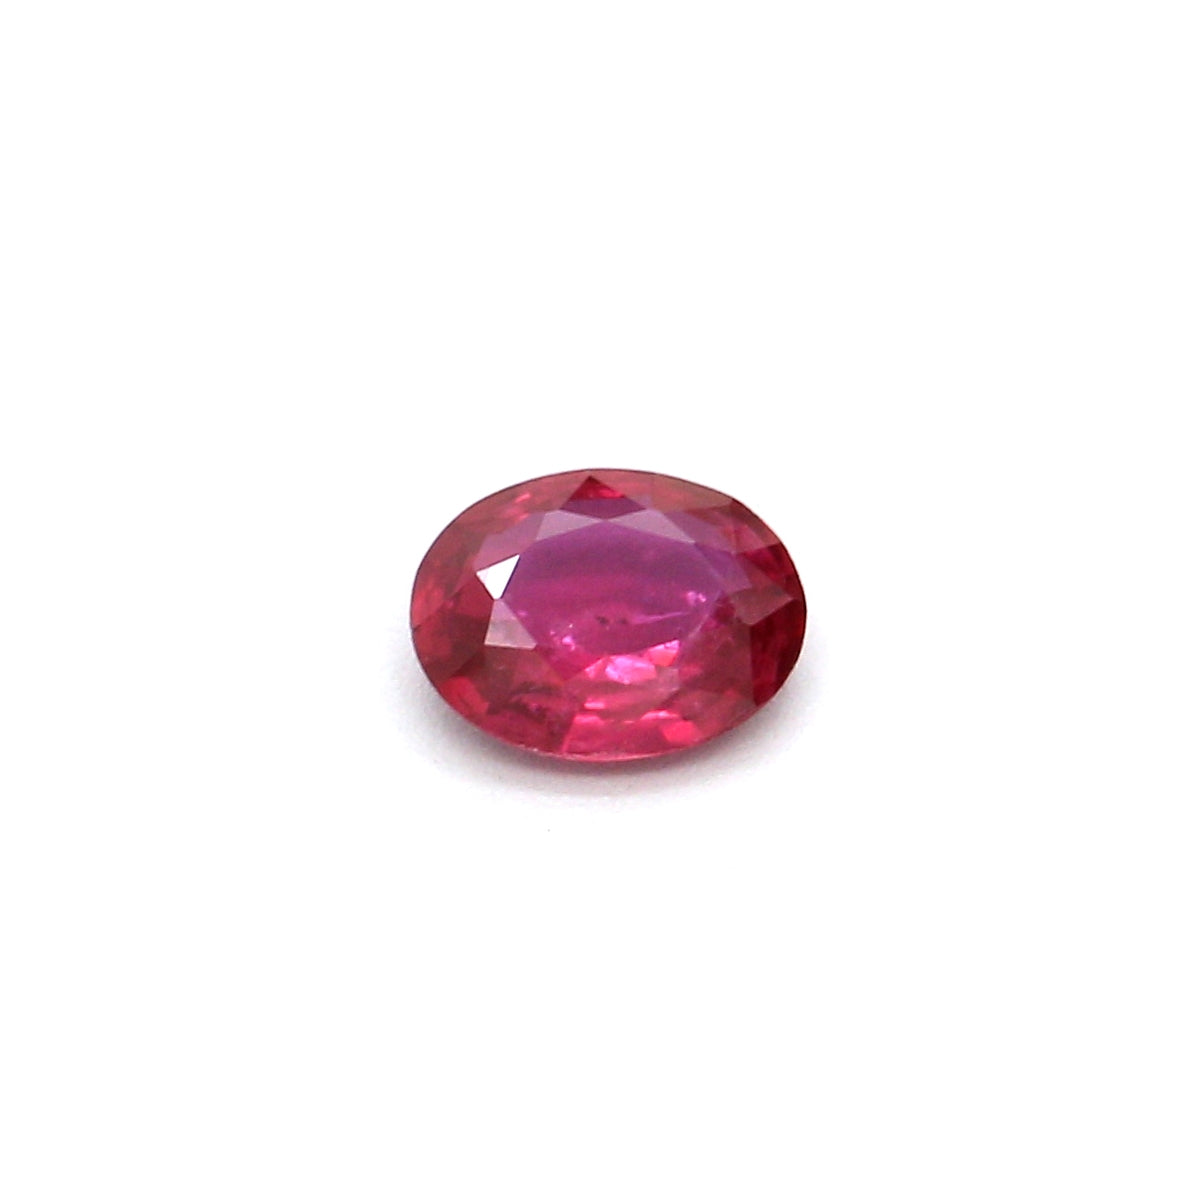 0.21ct Pinkish Red, Oval Ruby, H(b), Thailand - 4.37 x 3.48 x 1.61mm